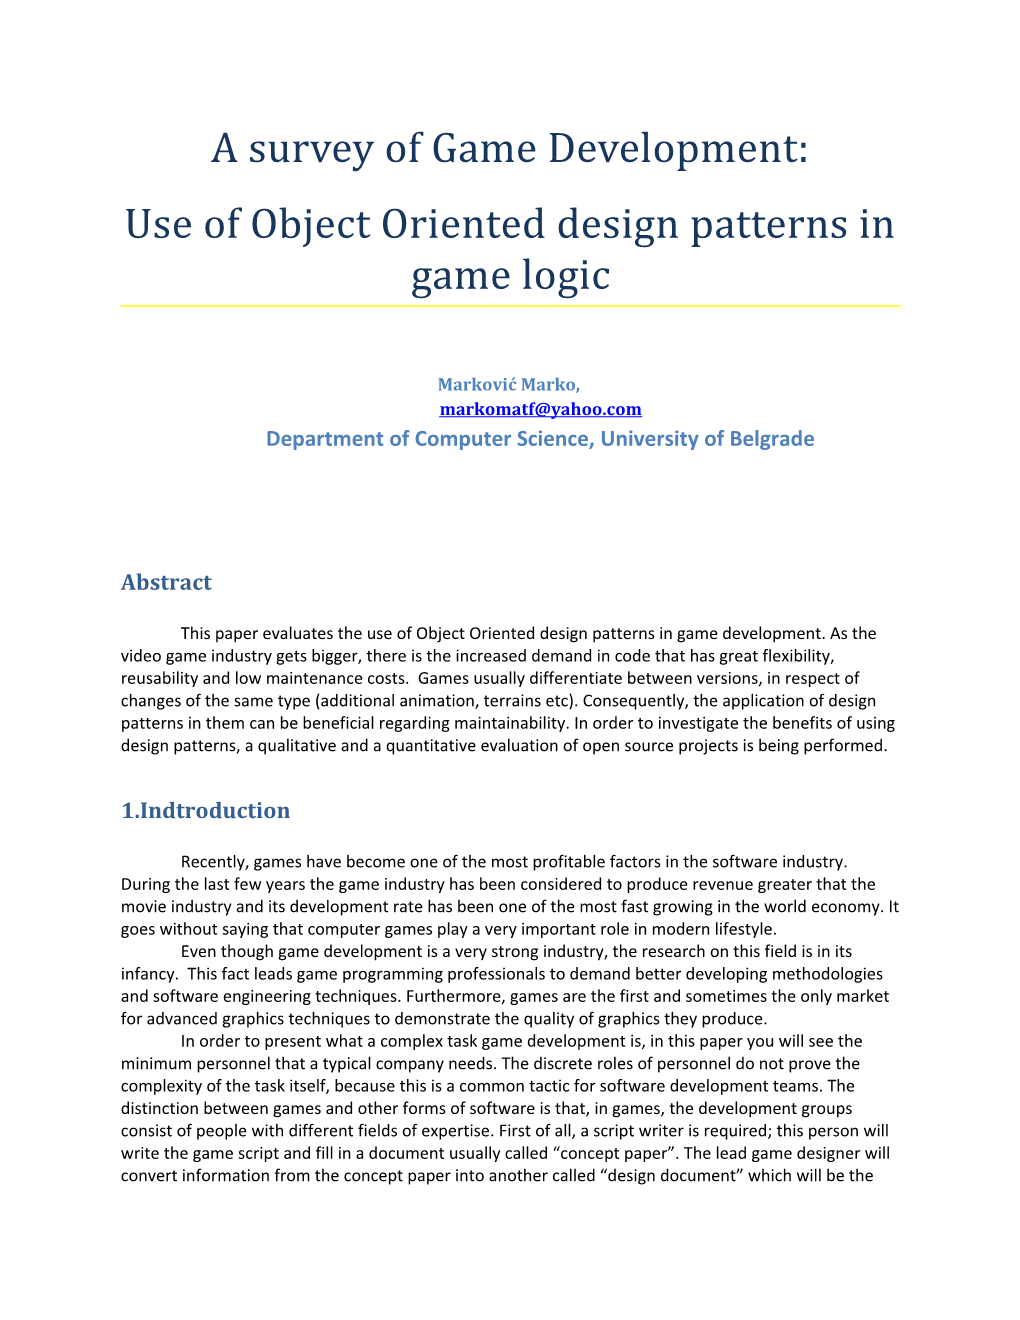 Use of Object Oriented Design Patterns in Game Logic